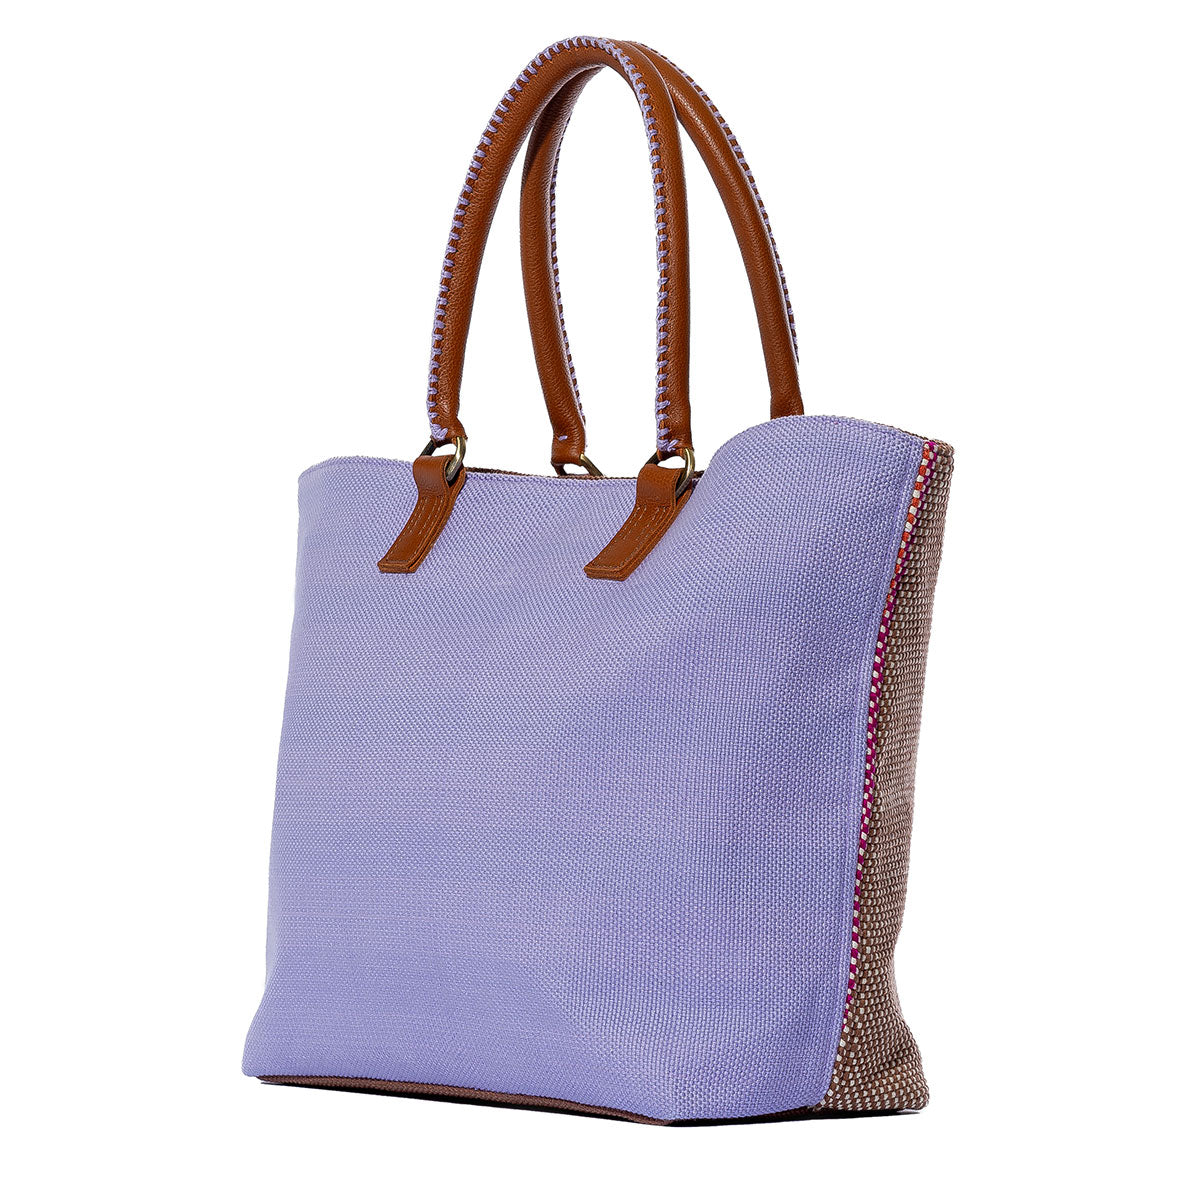 Hand Woven Artisan Tote Bags - Ethical and Sustainable Fashion ...